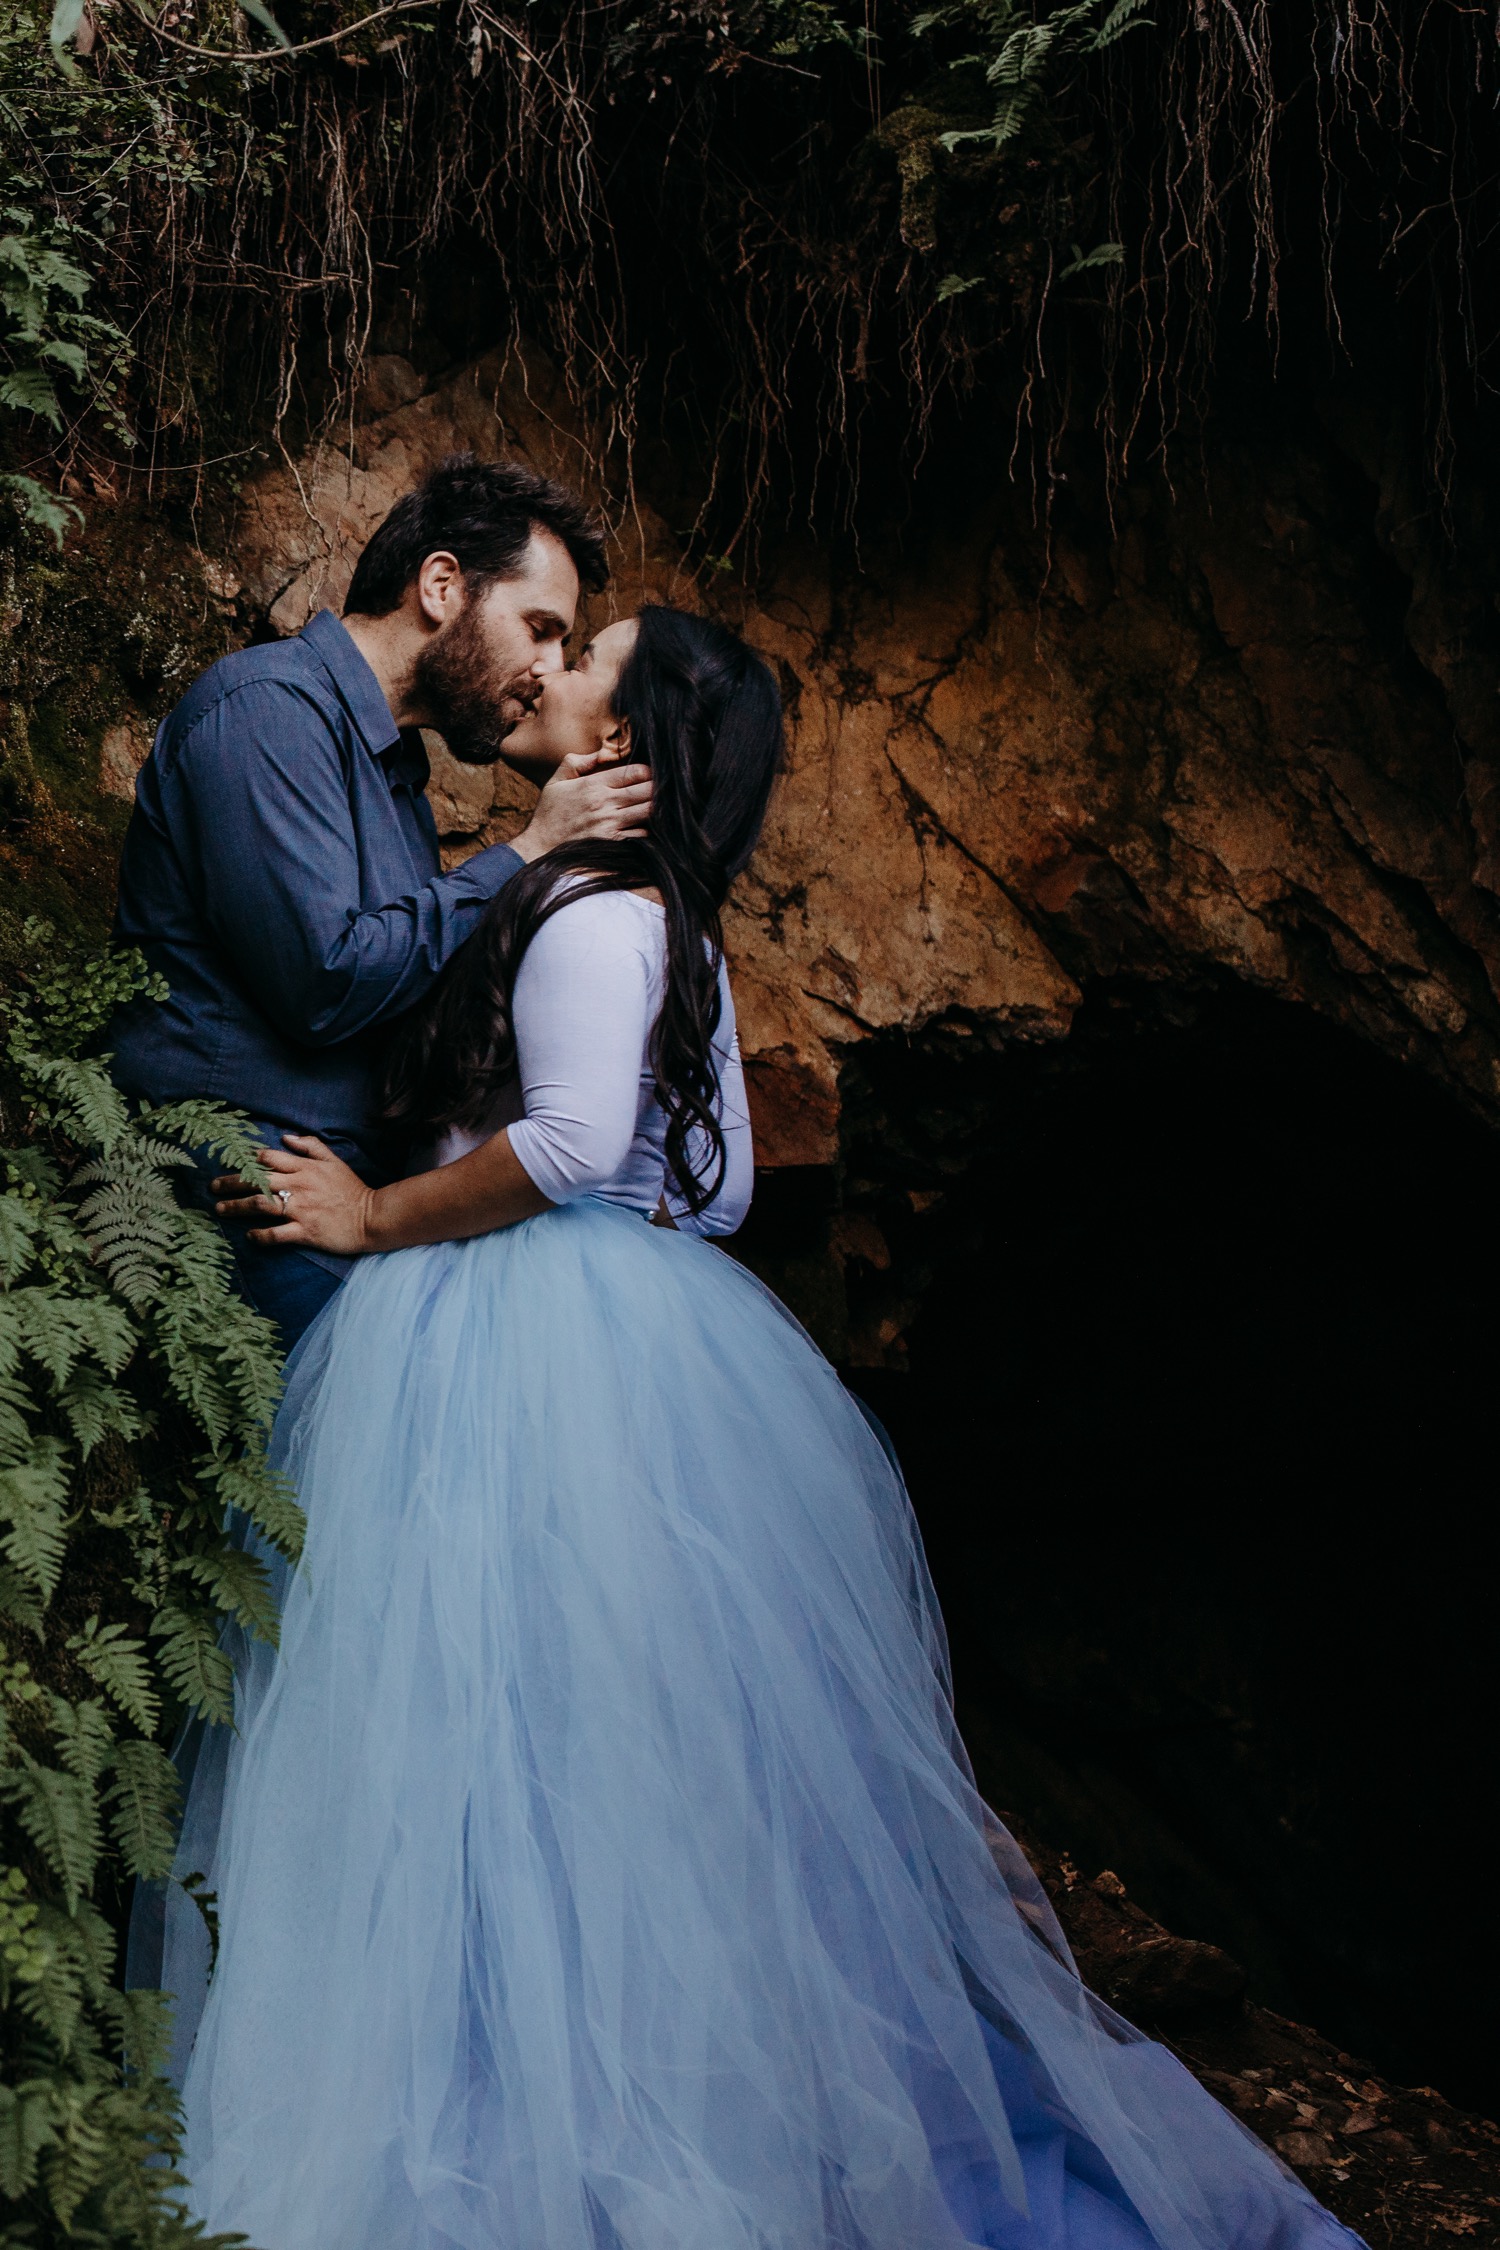 Couple kisses against rock wall with woman standing in light blue tulle skirt during their American River engagement photoshoot.